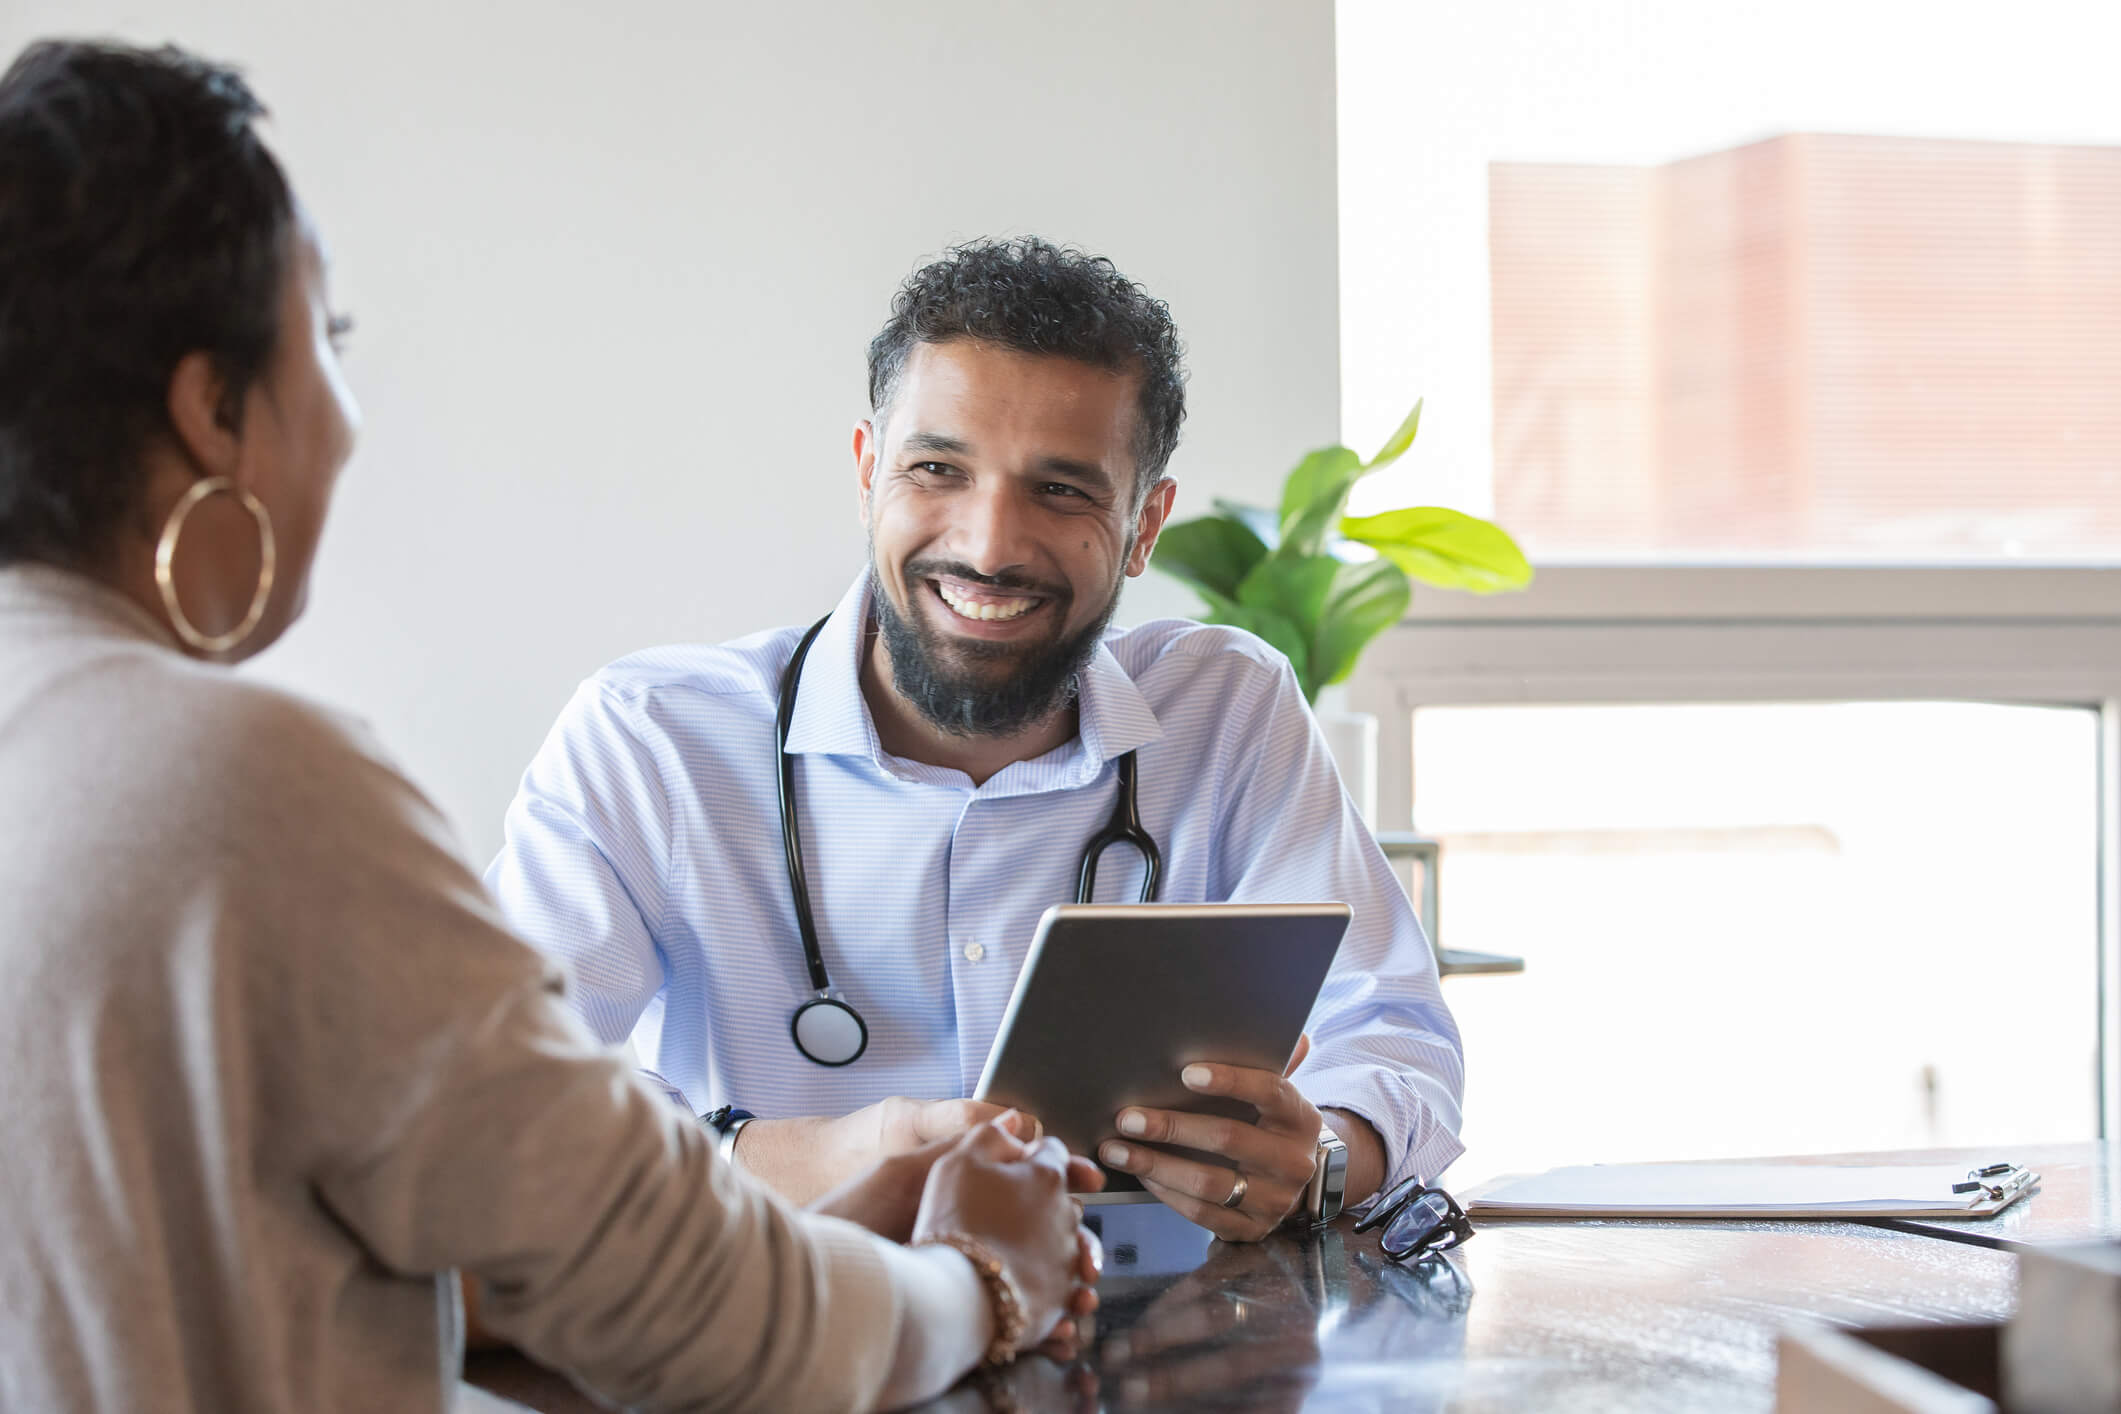 Doctor wearing a stethoscope sitting down holding a tablet smiling at a patient.